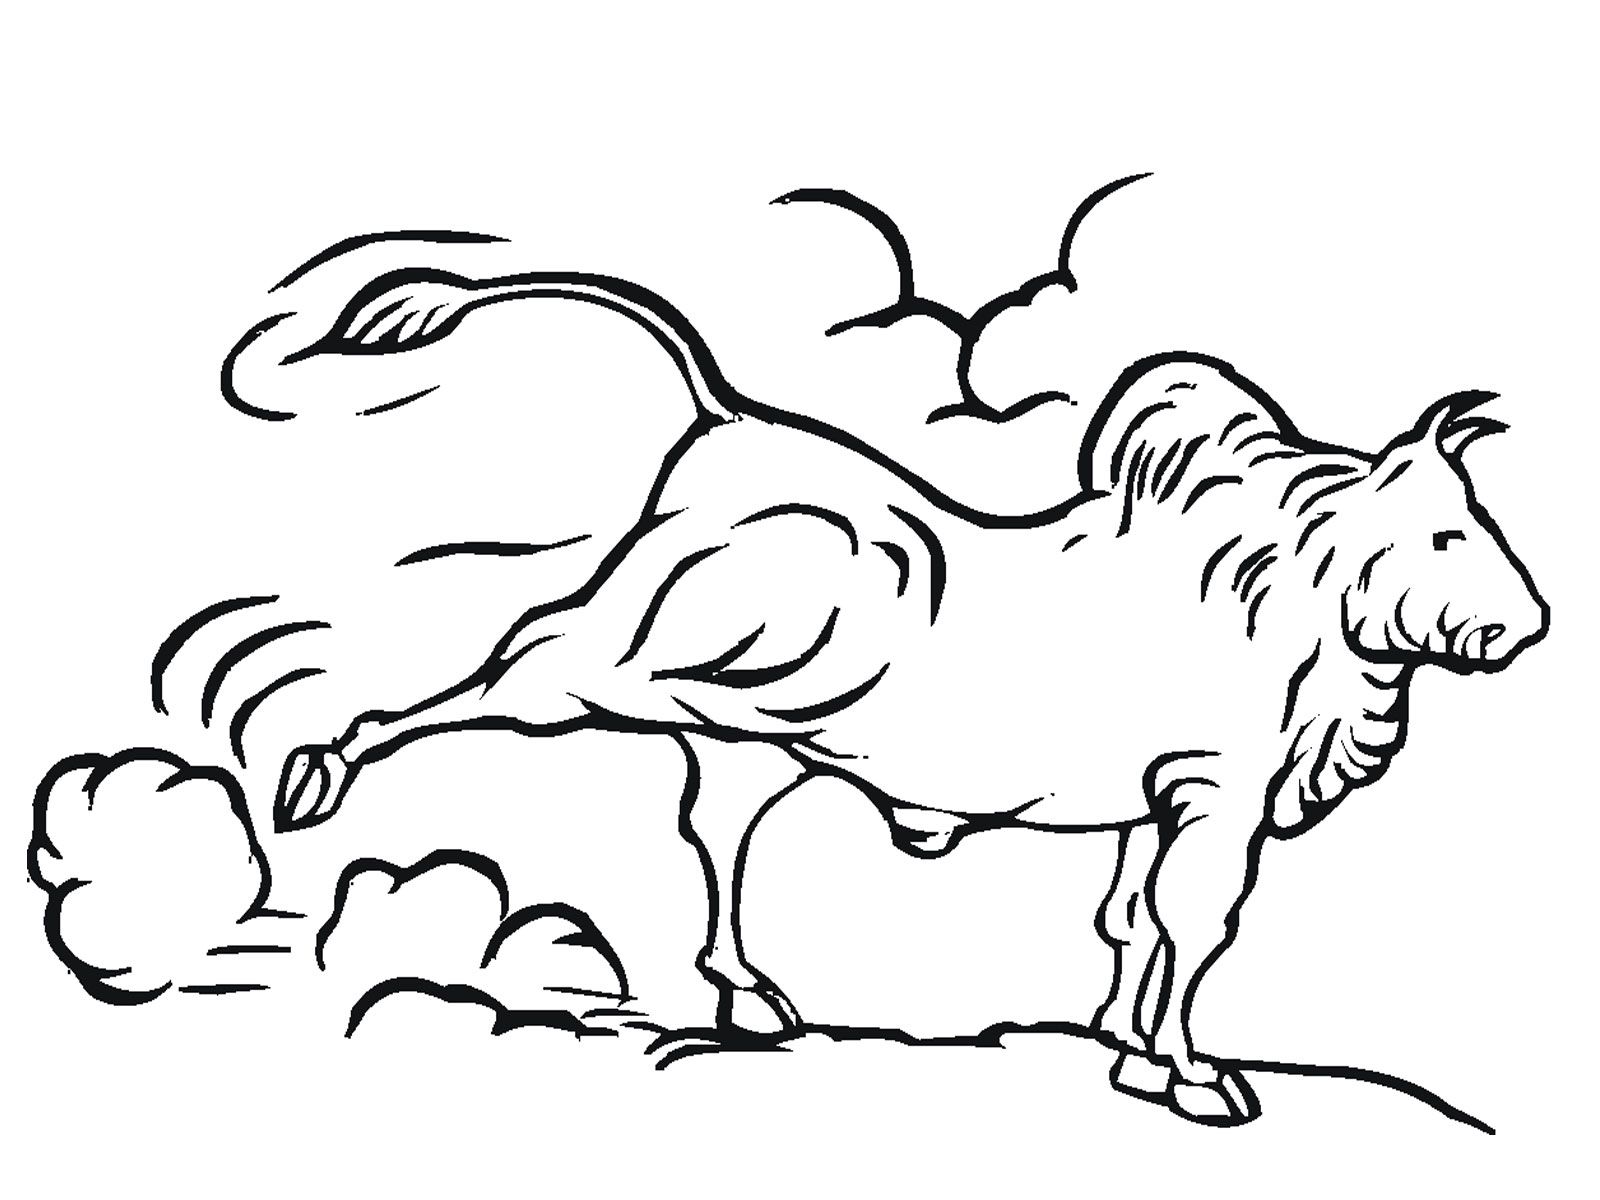 Bullriding Coloring Pages | Coloring Pages For All Ages